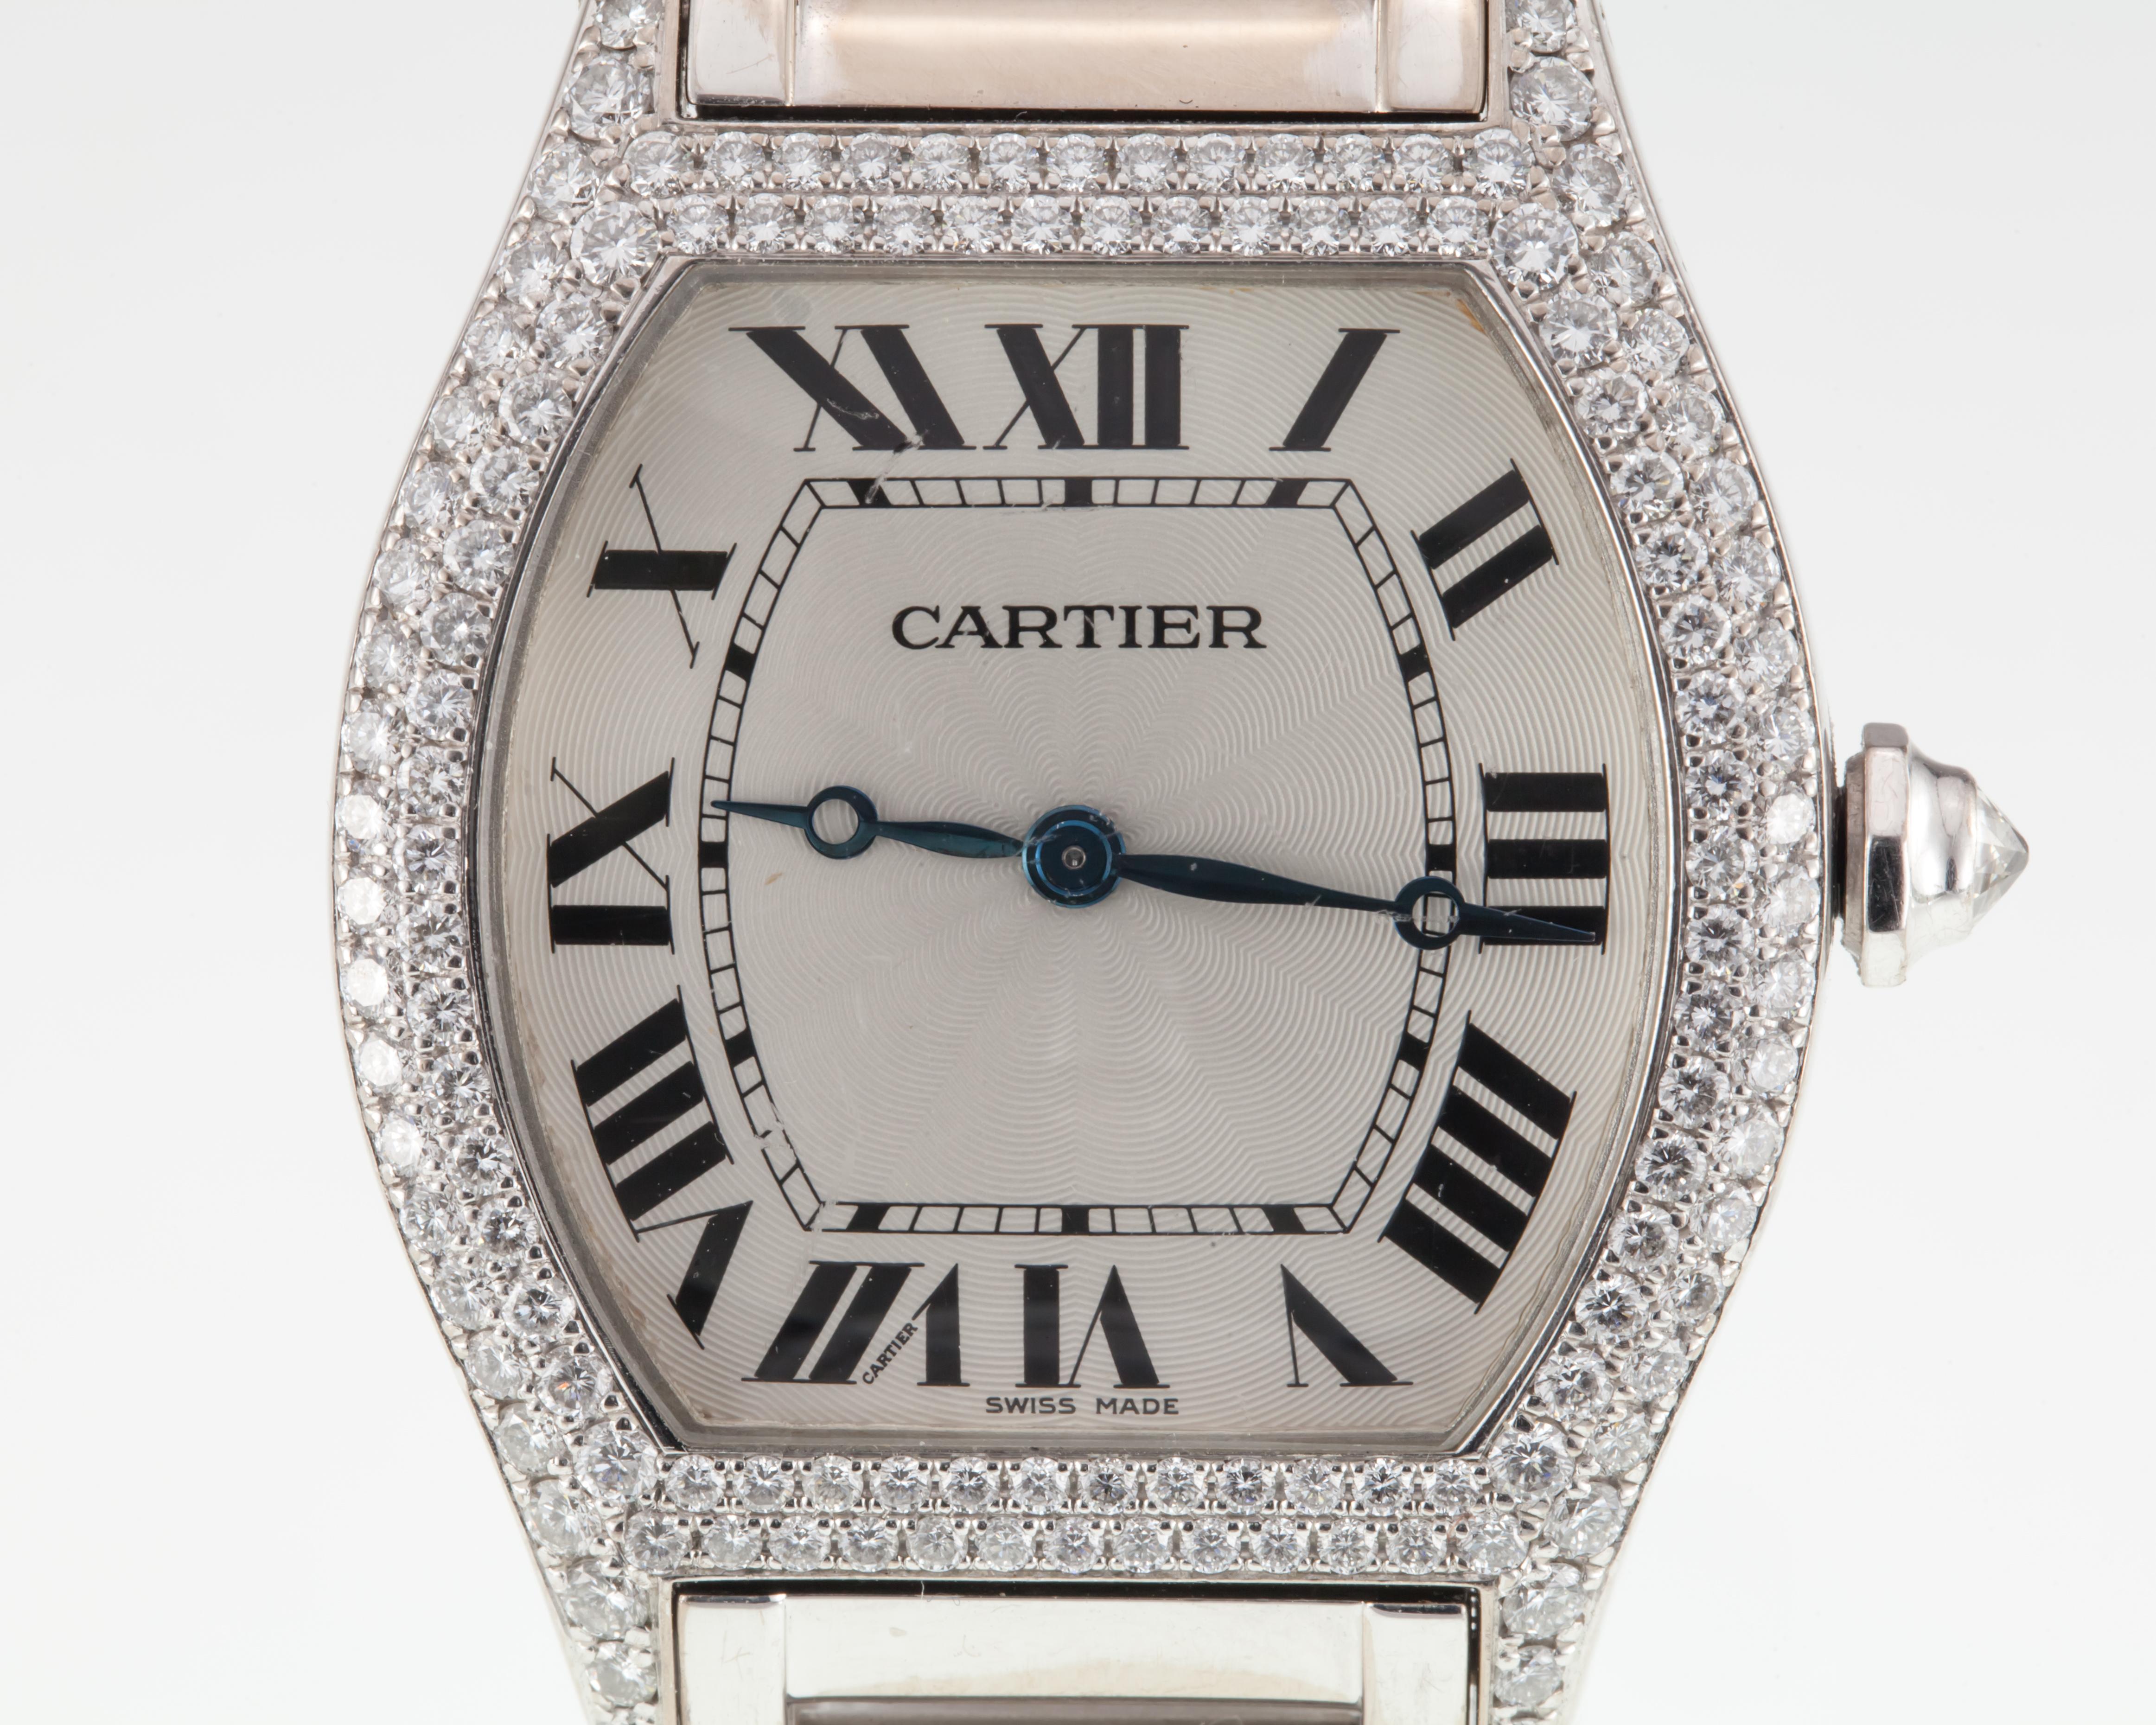 Model #2497
Movement #430 MC
18k White Gold Tonneau Case
NOTE: Very minor scratches on sapphire crystal.
Features Factory Collection Quality Diamonds All around Bezel and Lugs
Case Width = 33 mm (37 mm w/ Diamond Culet Crown)
Case Length = 33